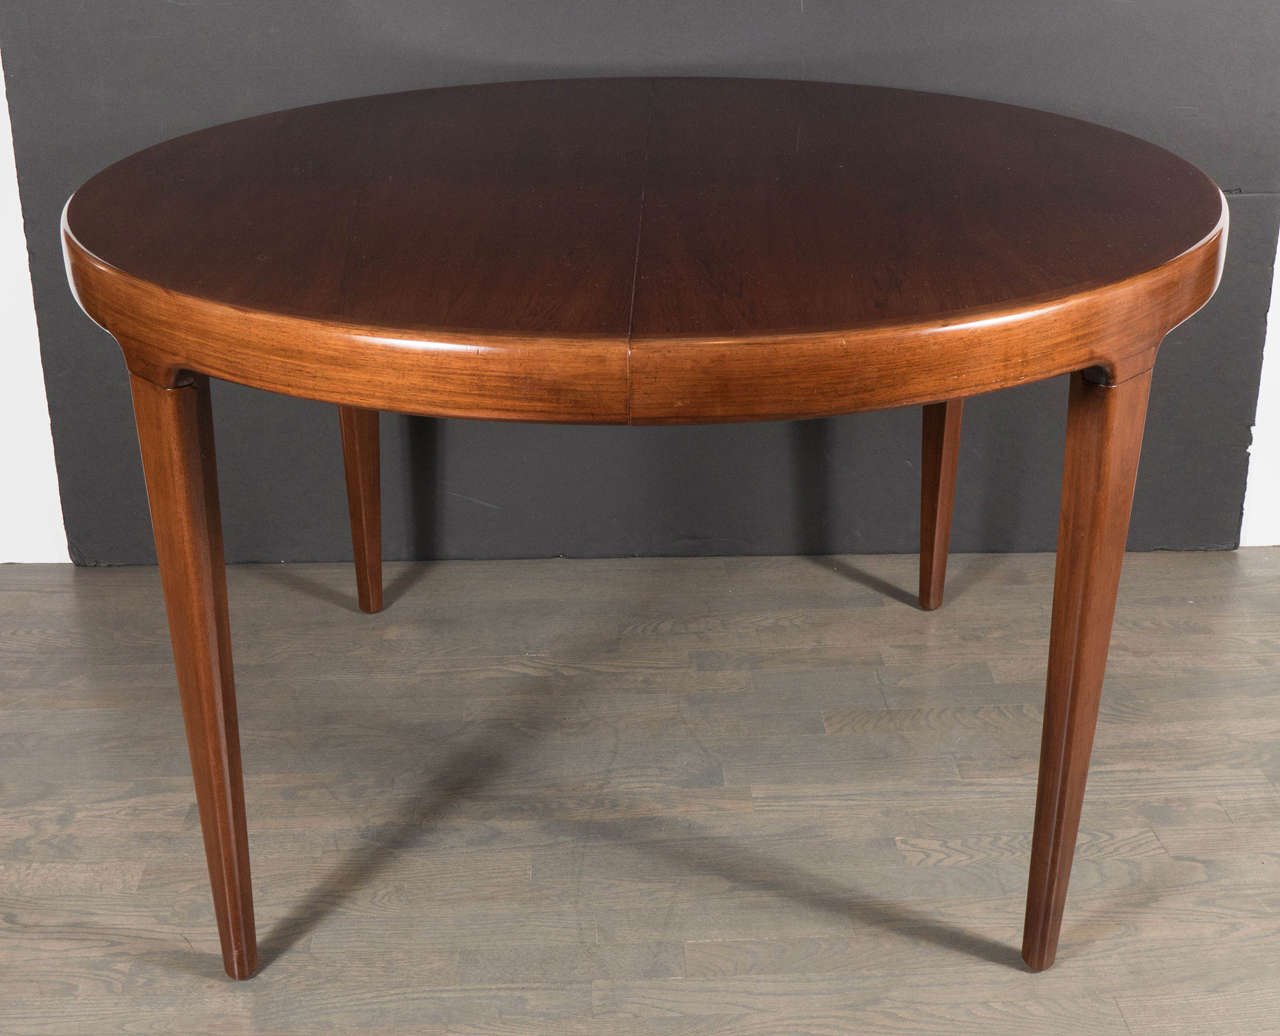 Sophisticated Mid-Century Modernist dining table in the manner of  Vladimir Kagan in bookmatched walnut with one extension leaf. This ultra-chic Mid-Century dining table features a tabletop in bookmatched walnut in a hand-rubbed finish that really